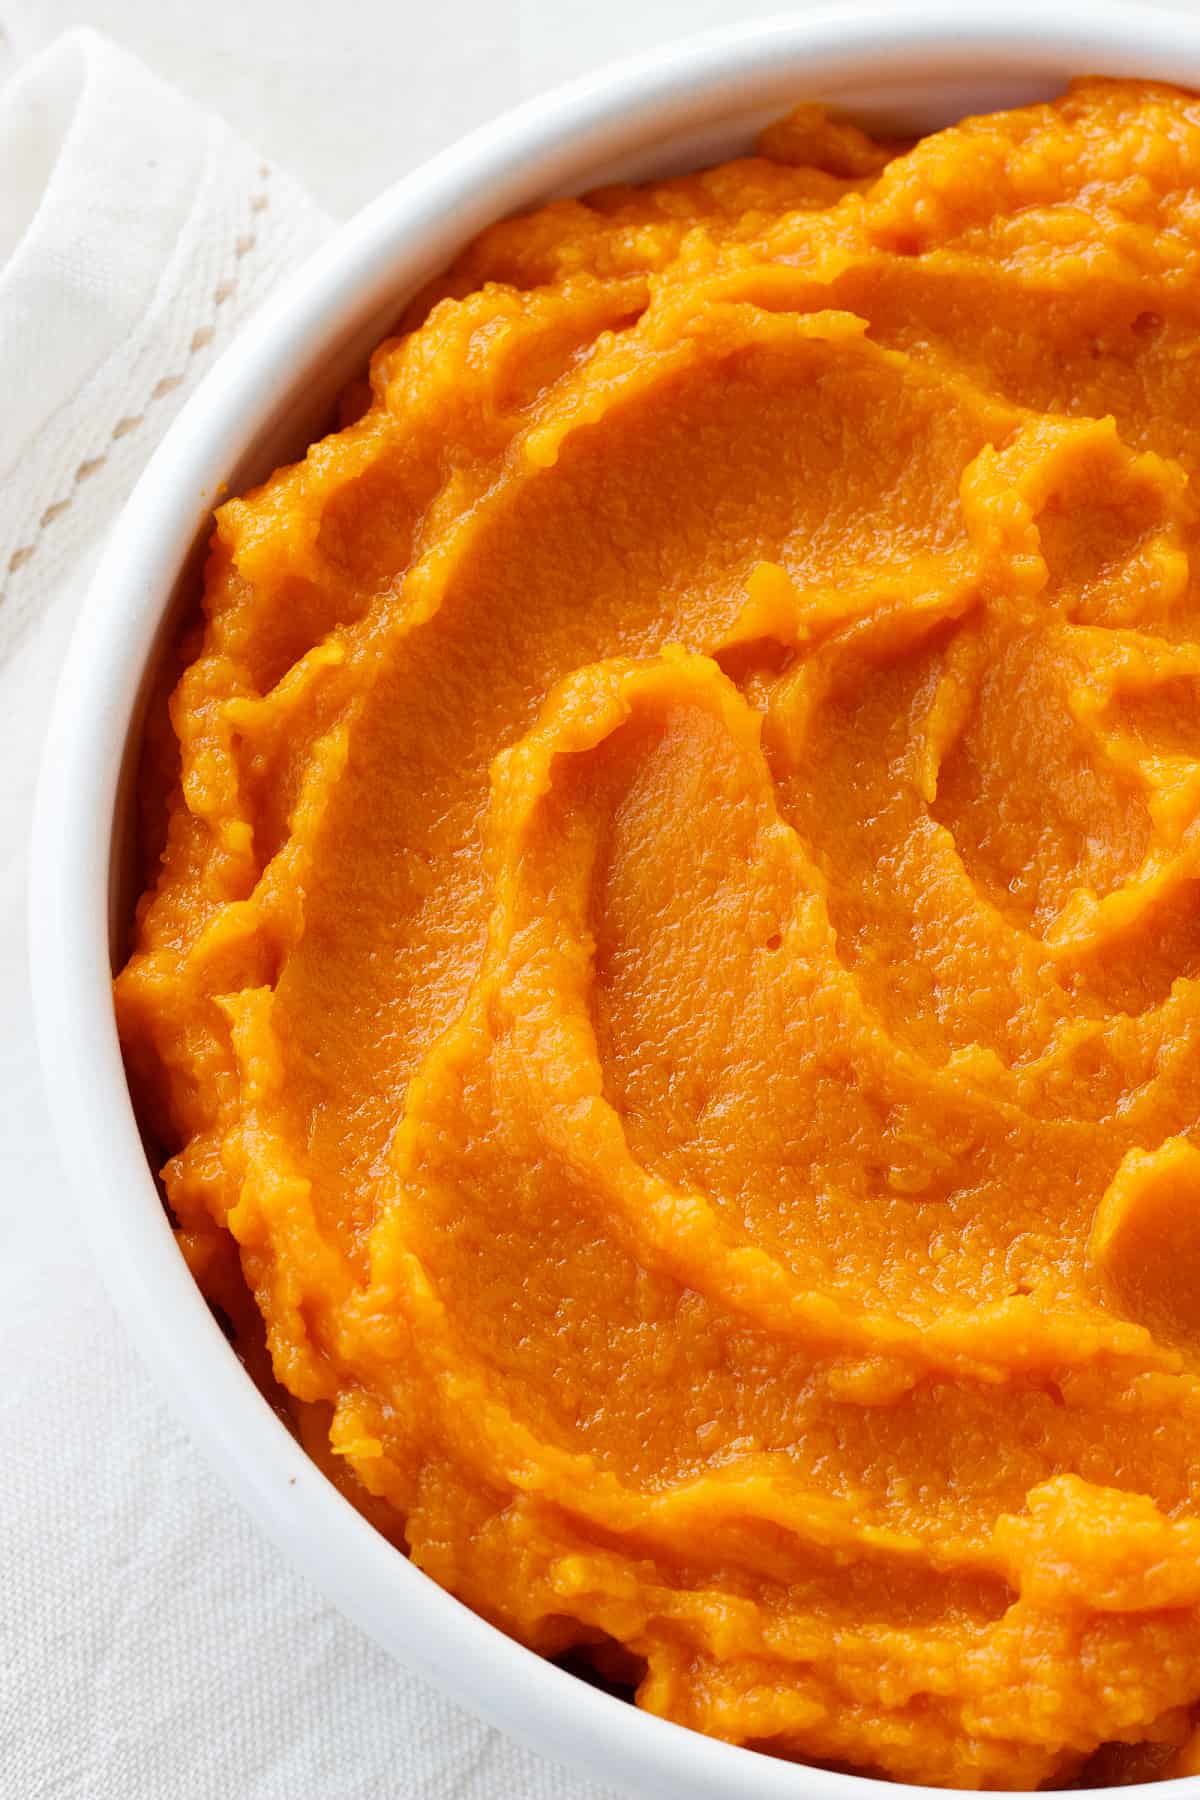 Partial view of pumpkin puree in white bowl on white surface